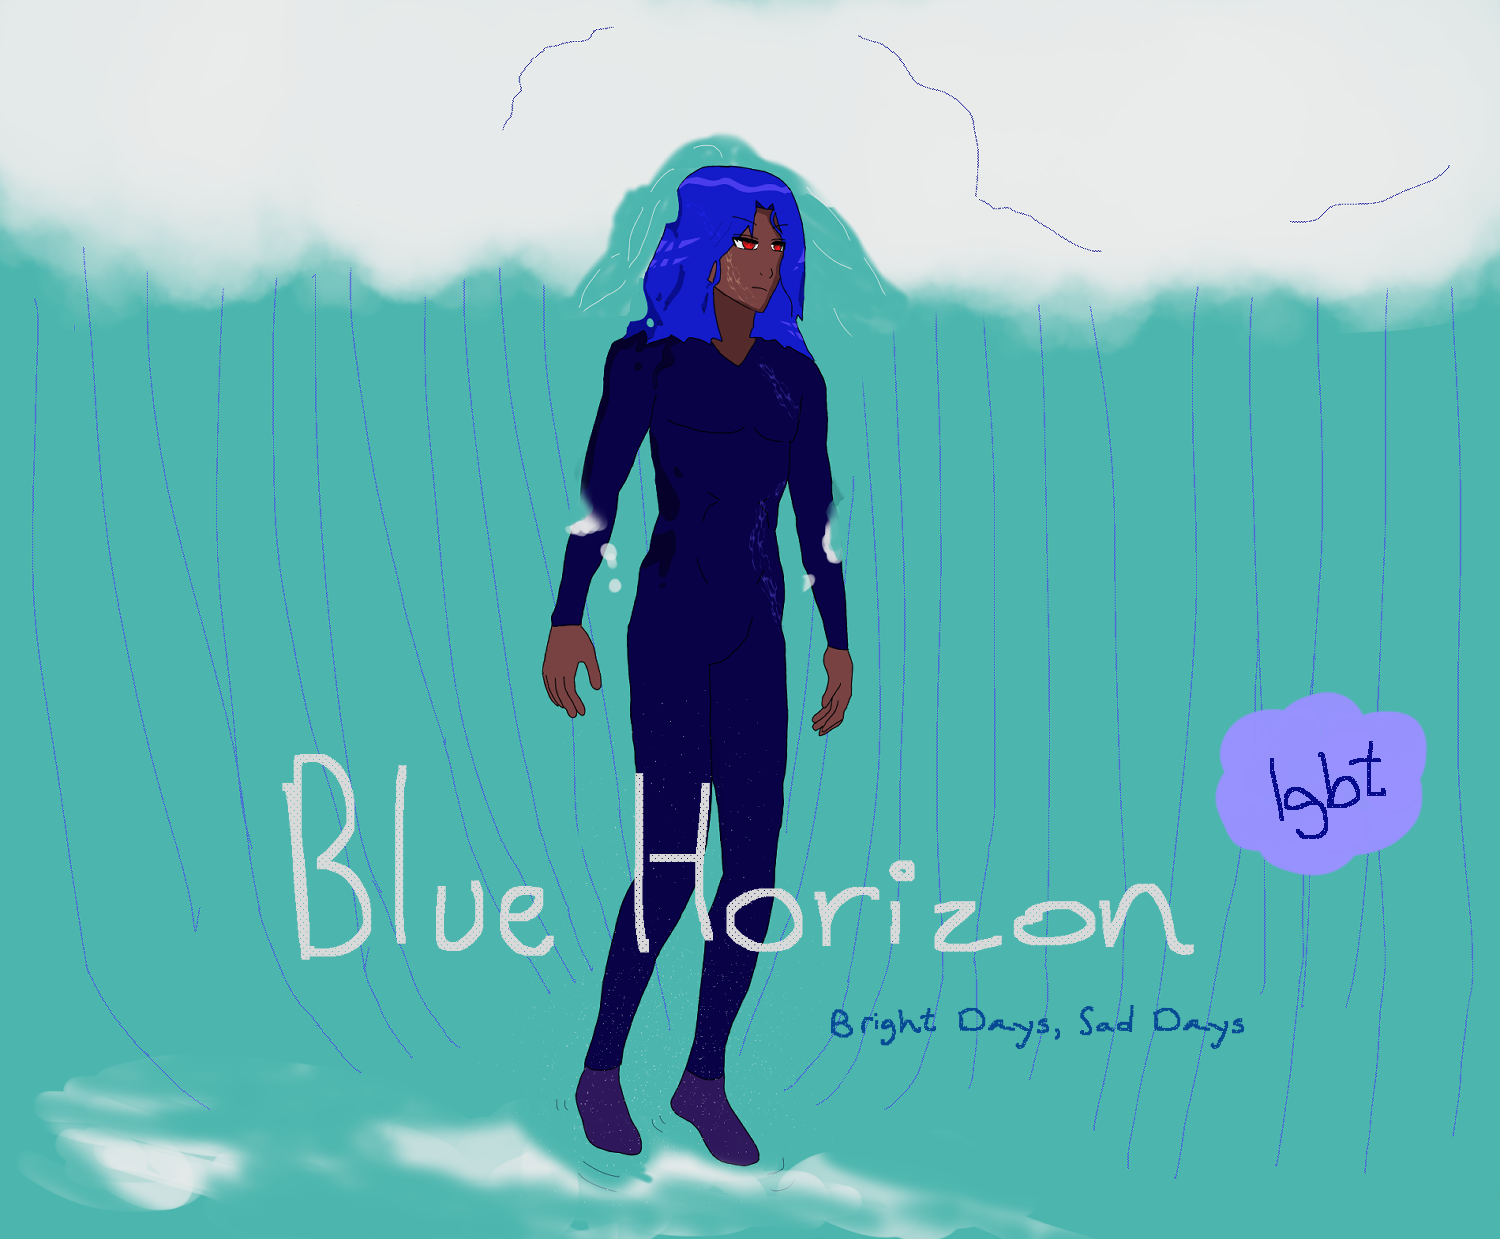 A panel with a rising aquamarine sea behind Antonio Chandrani who has hair like blue waves falling around him, brown skin, wearing blue diver-like suit. He's shown moving the waves around him. Implied he's floating with mist and there's foam near his legs.